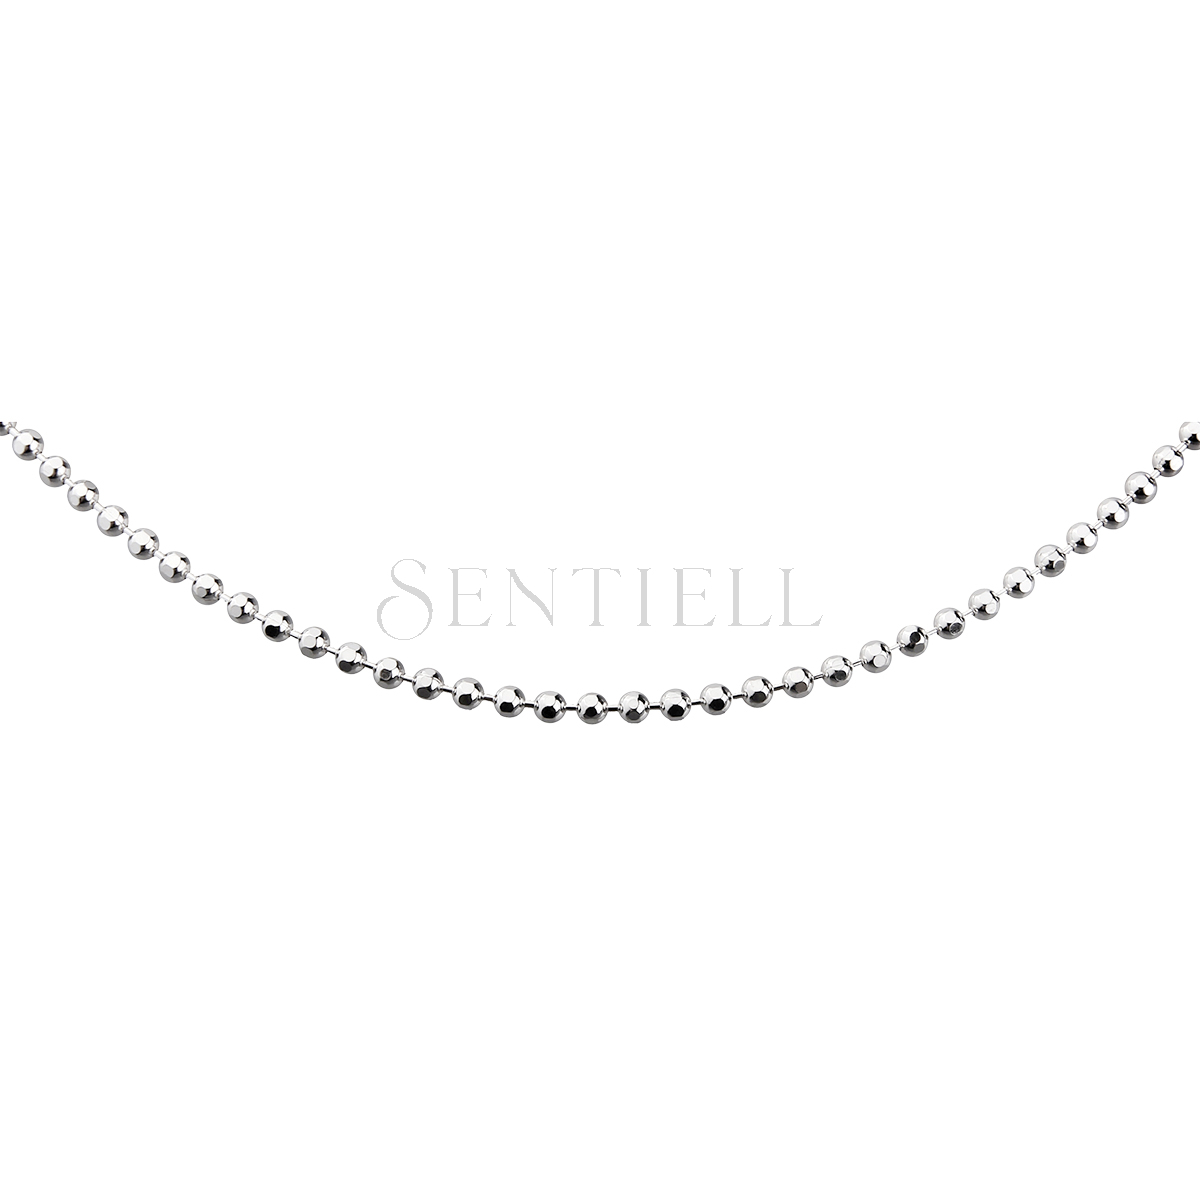 5094 - Silver (925) ball chain necklace for military tags